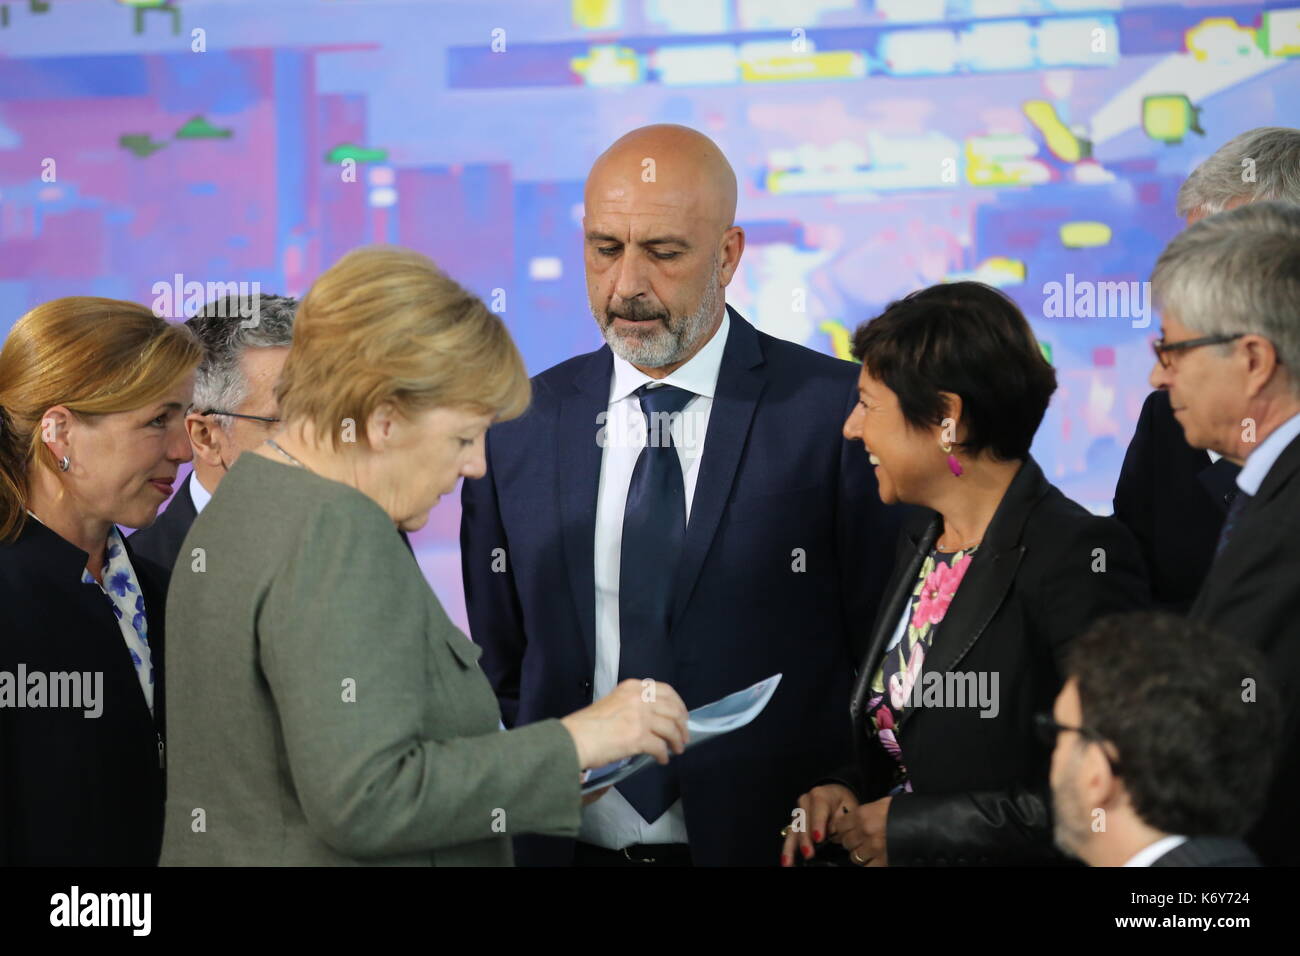 Federal Chancellor Angela Merkel welcomes the Mayor of Amatrice from Italy, Sergio Pirozzi, Dr. Vasco Errani, former Commissioner for Reconstruction, Paula Di Michelli, Commissioner for Reconstruction, Dr. Baolo Anibaldi, Health Commissioner of Rieti on the occasion of financing the reconstruction of the hospital in Amatrice by Germany. After the severe earthquakes, the village of Amatrice was almost destroyed in Central Italy. State Secretary Gunther Adler visited the Italian village at the beginning of August and signed an agreement on the German aid to reconstruction. (Photo by Simone Kuhlm Stock Photo